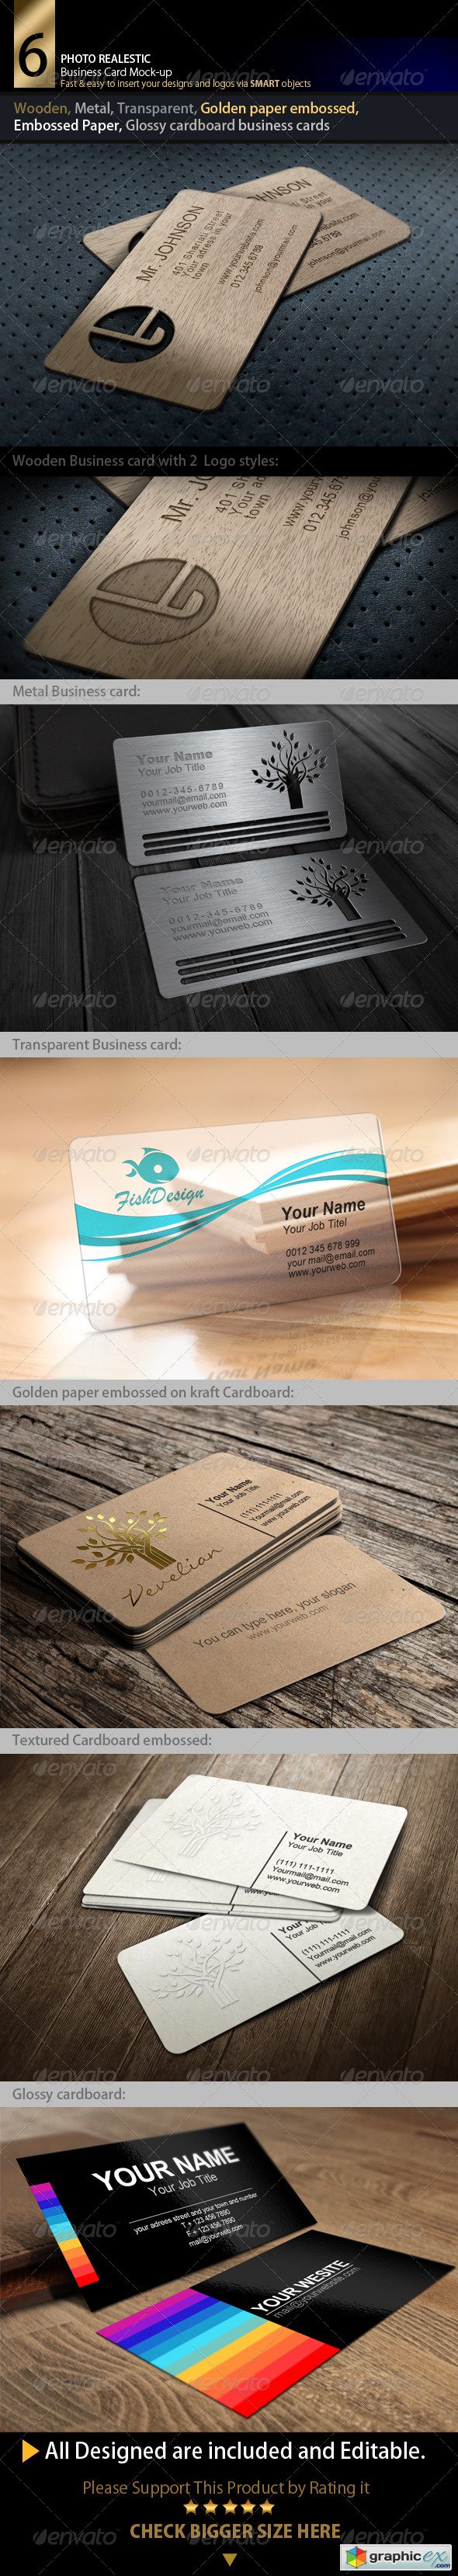 Photo Realistic Business card Mock-up